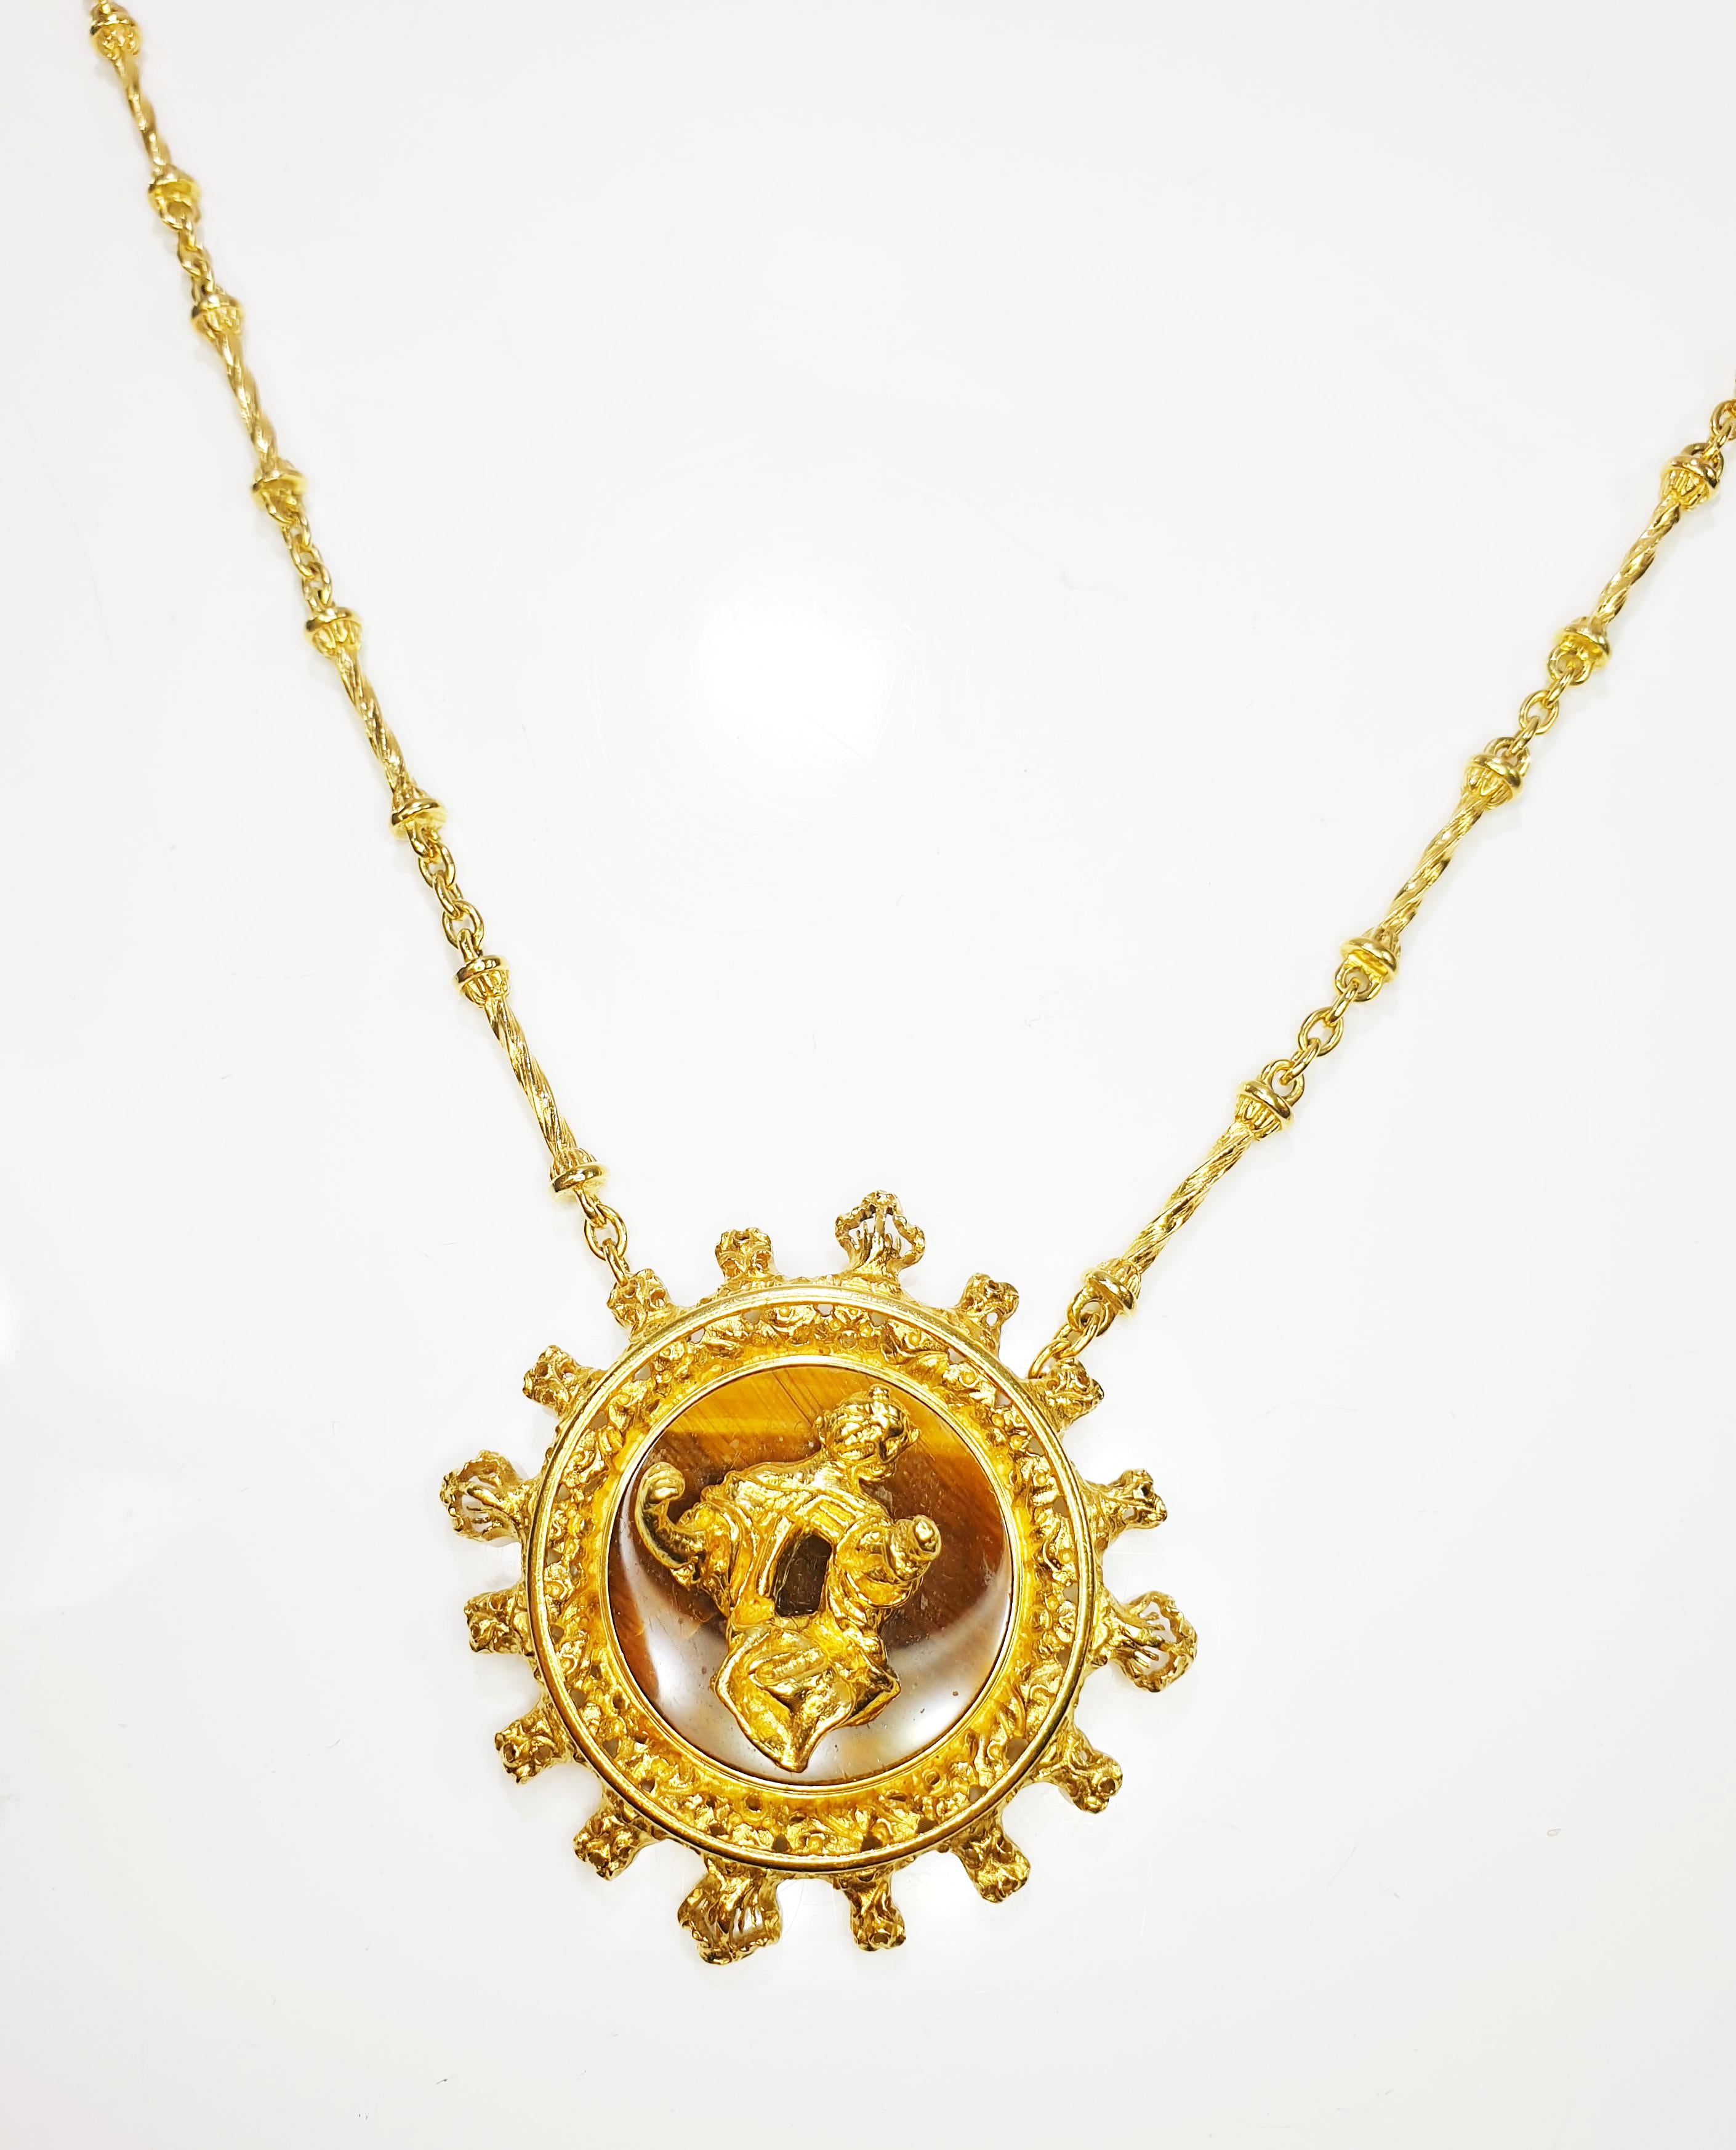 Unique only One in series of ten Limited Edition 18k Yellow Gold Salvador Dali Madonna de Port Lligat Pendant Necklace / Bracelet with tiger´s eye center base 
This is a limited edition numbered piece from 1970's, number 1 out of 10 ever made.
This